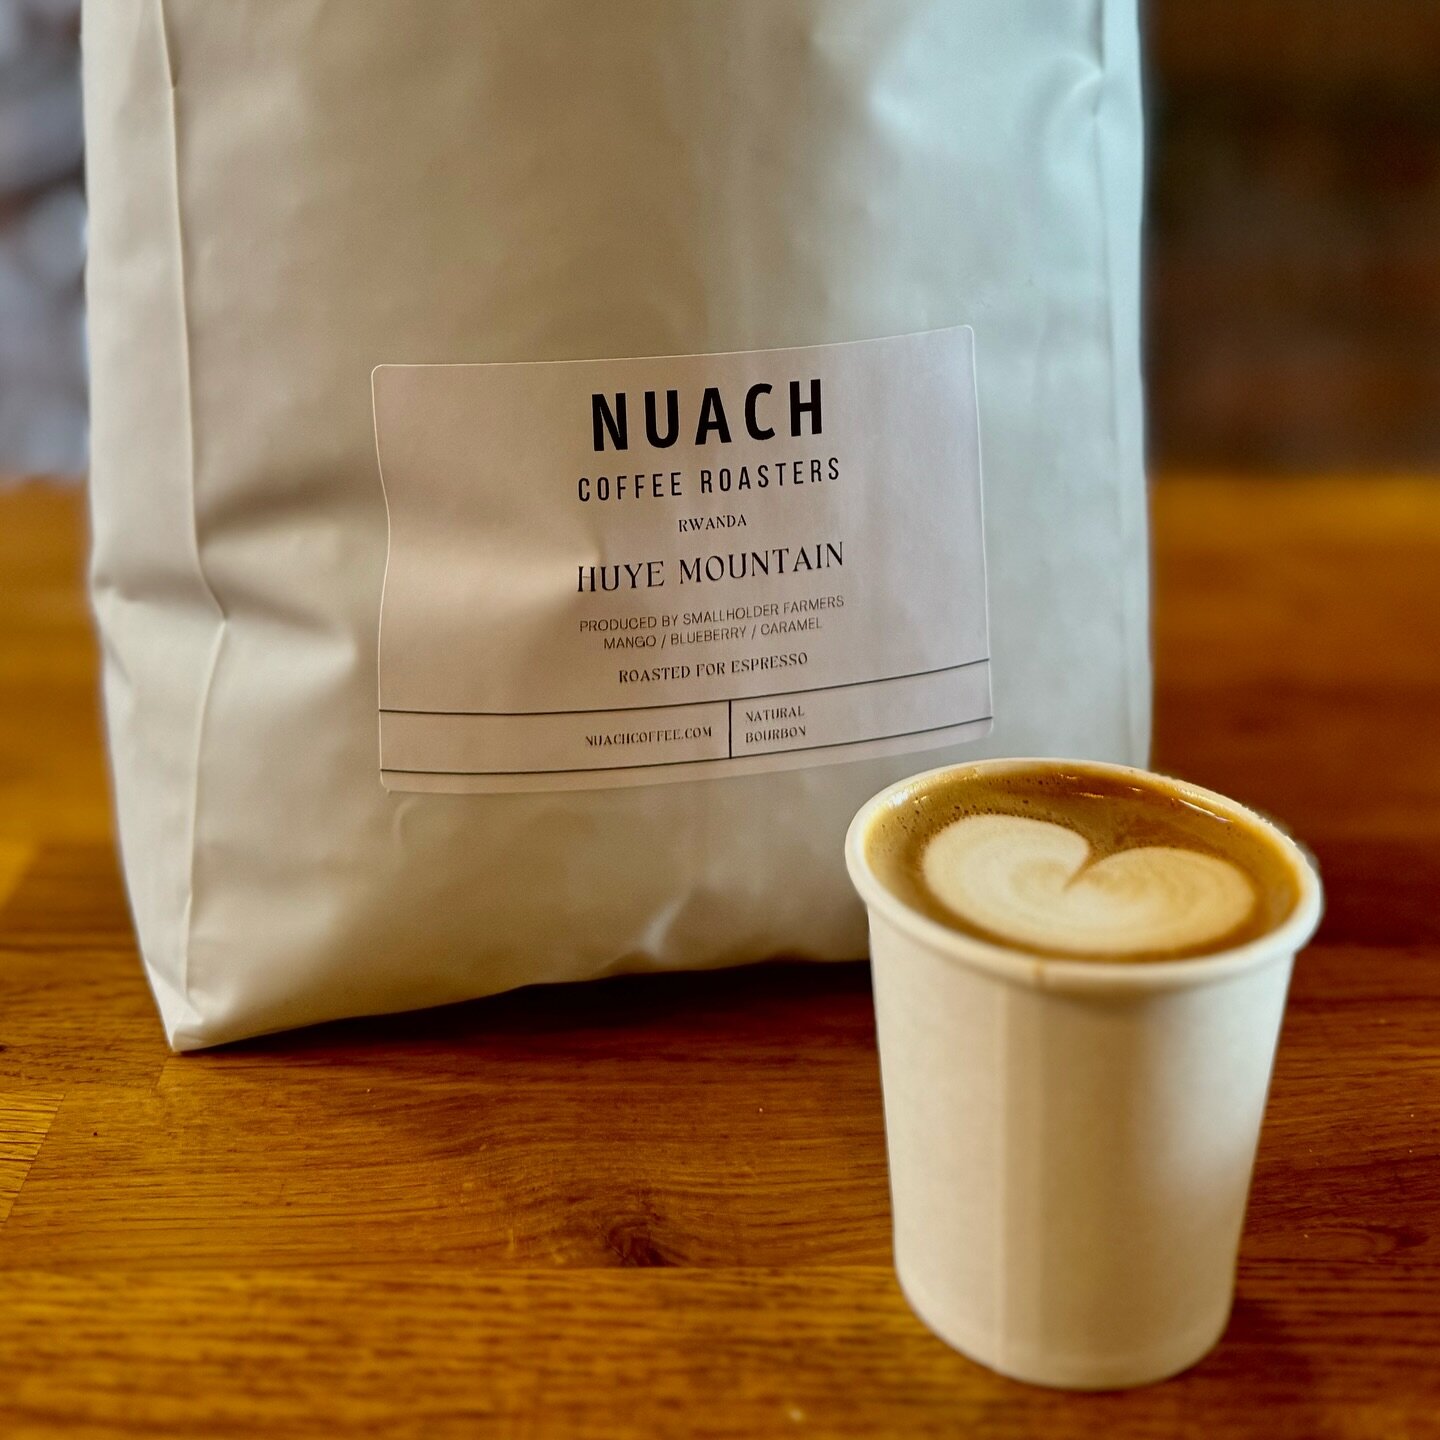 LIMITED NUACH ESPRESSO! Huye Mountain is back and the team adore it. A naturally-processed Rwandan, with strong notes of sweet mango and caramel. Super juicy, full-bodied espresso. Come and try for yourself!

#coffee #coffeeshop #specialtycoffee #nom